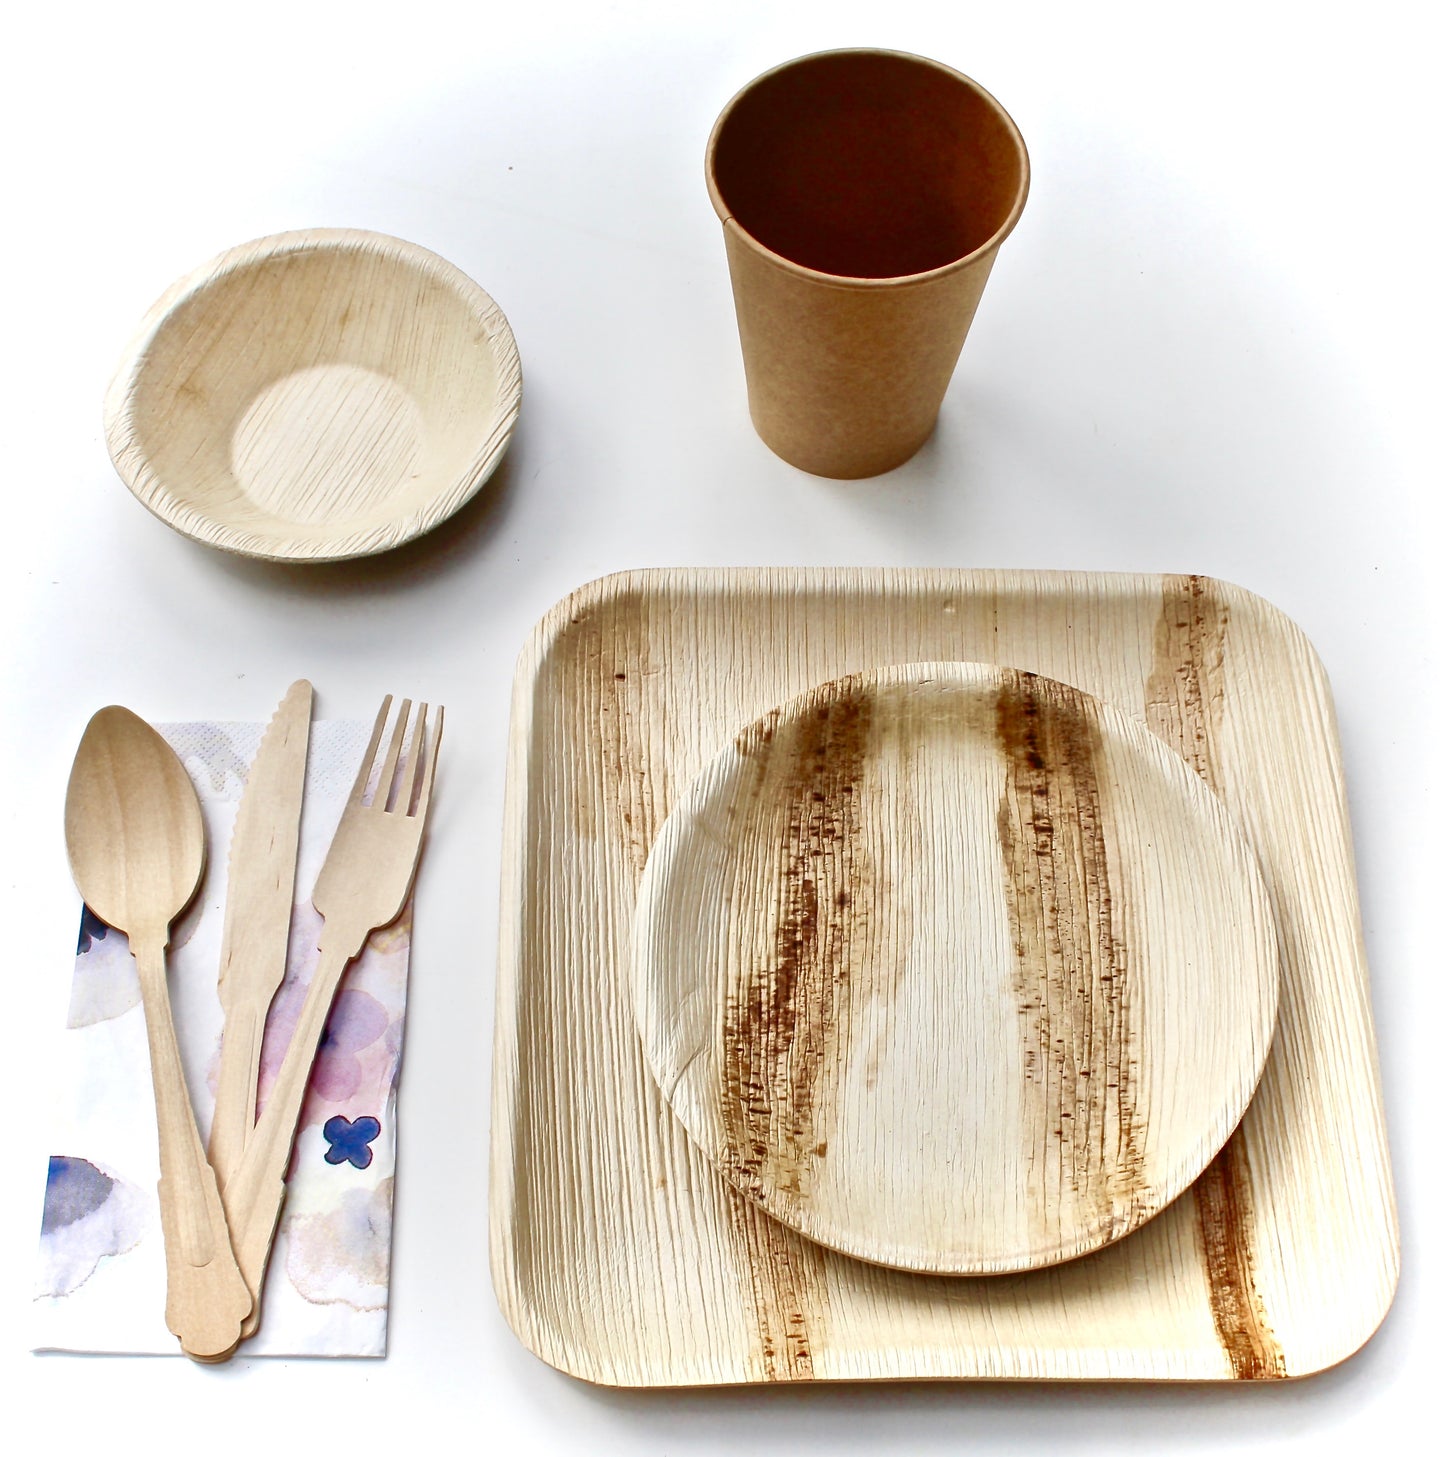 Bamboo Type Palm leaf plate 50 pices Square 10"  - 50 pic 6"heart  and 150 pic cutlery  eco frindly - biodegrable - disposable - compostable